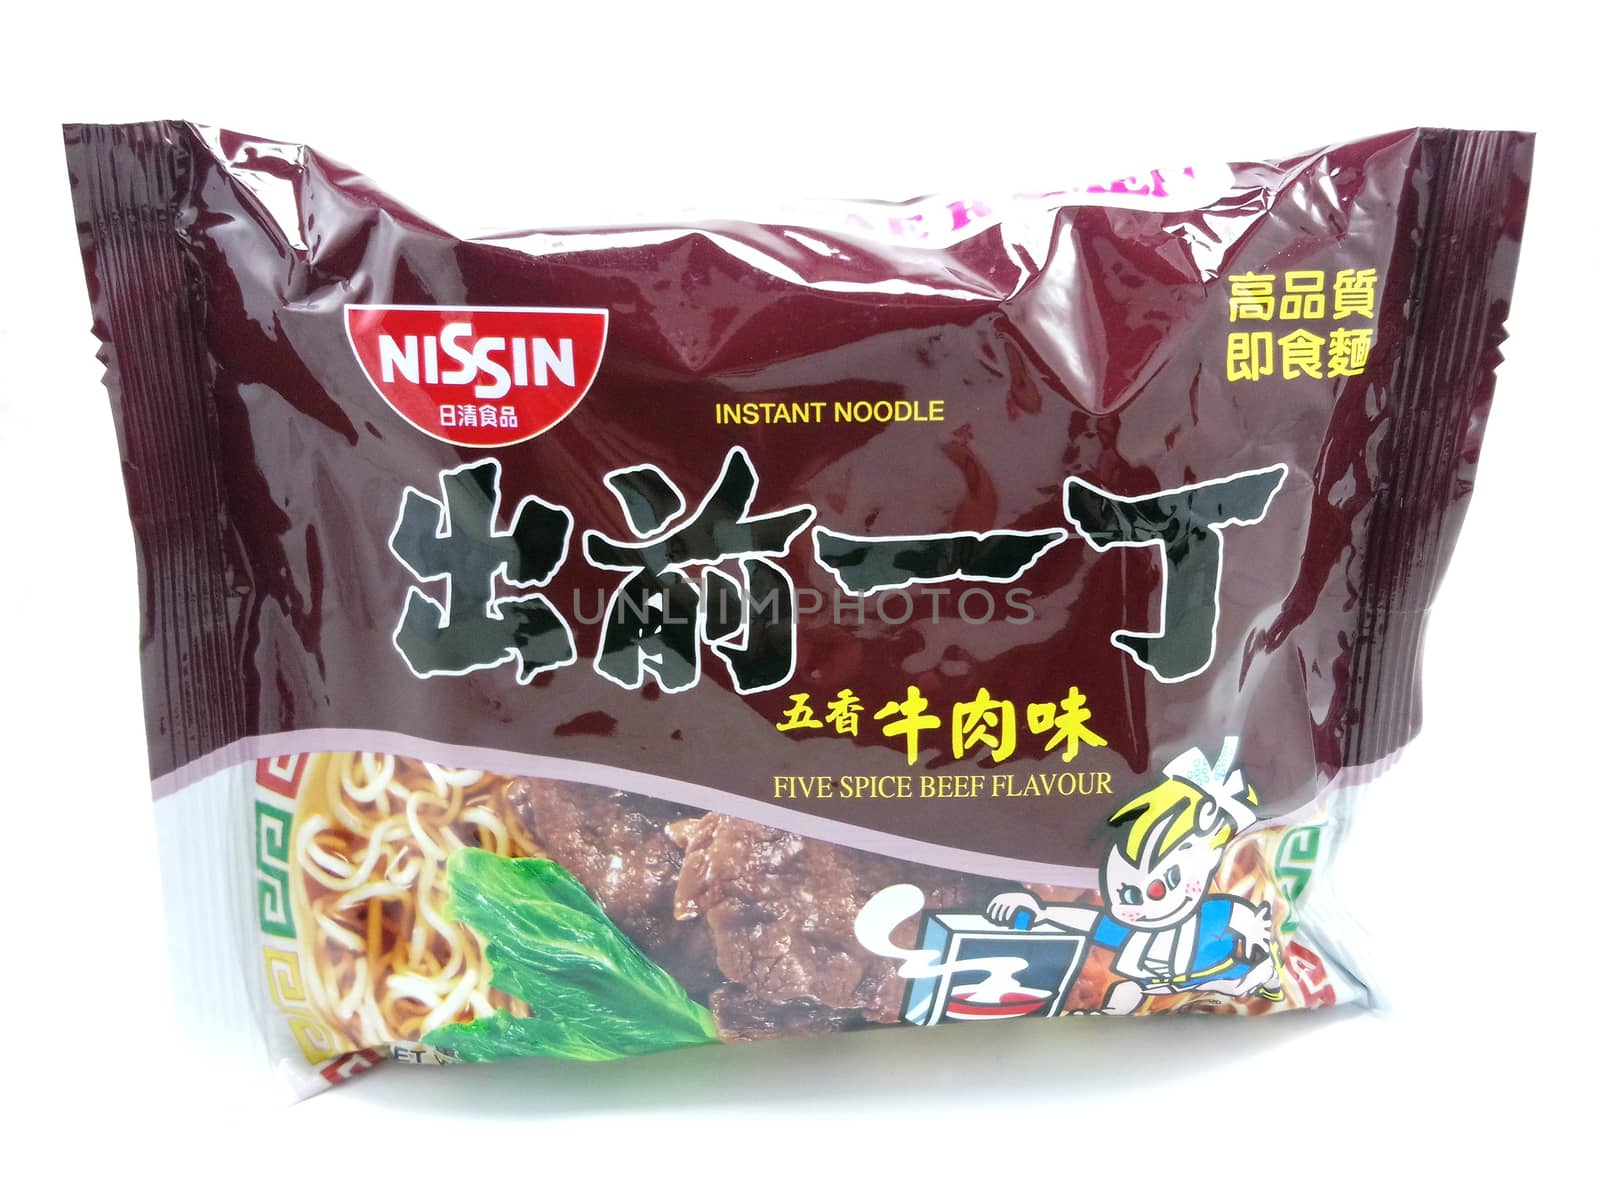 Nissin five spice beef flavor noodles in Manila, Philippines by imwaltersy